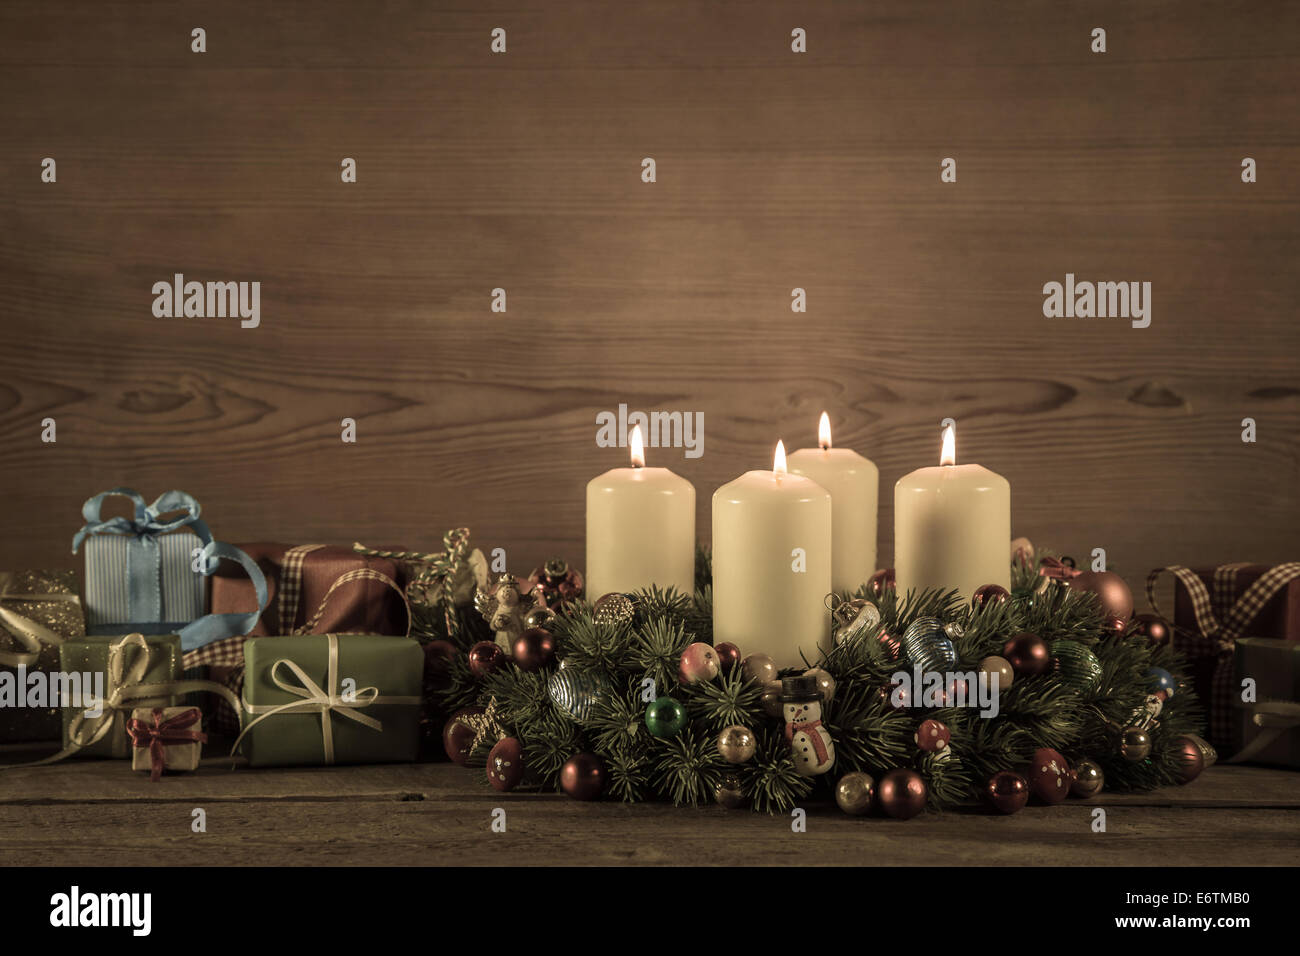 Advent wreath or crown with four burning candles and christmas gifts for a voucher. Stock Photo